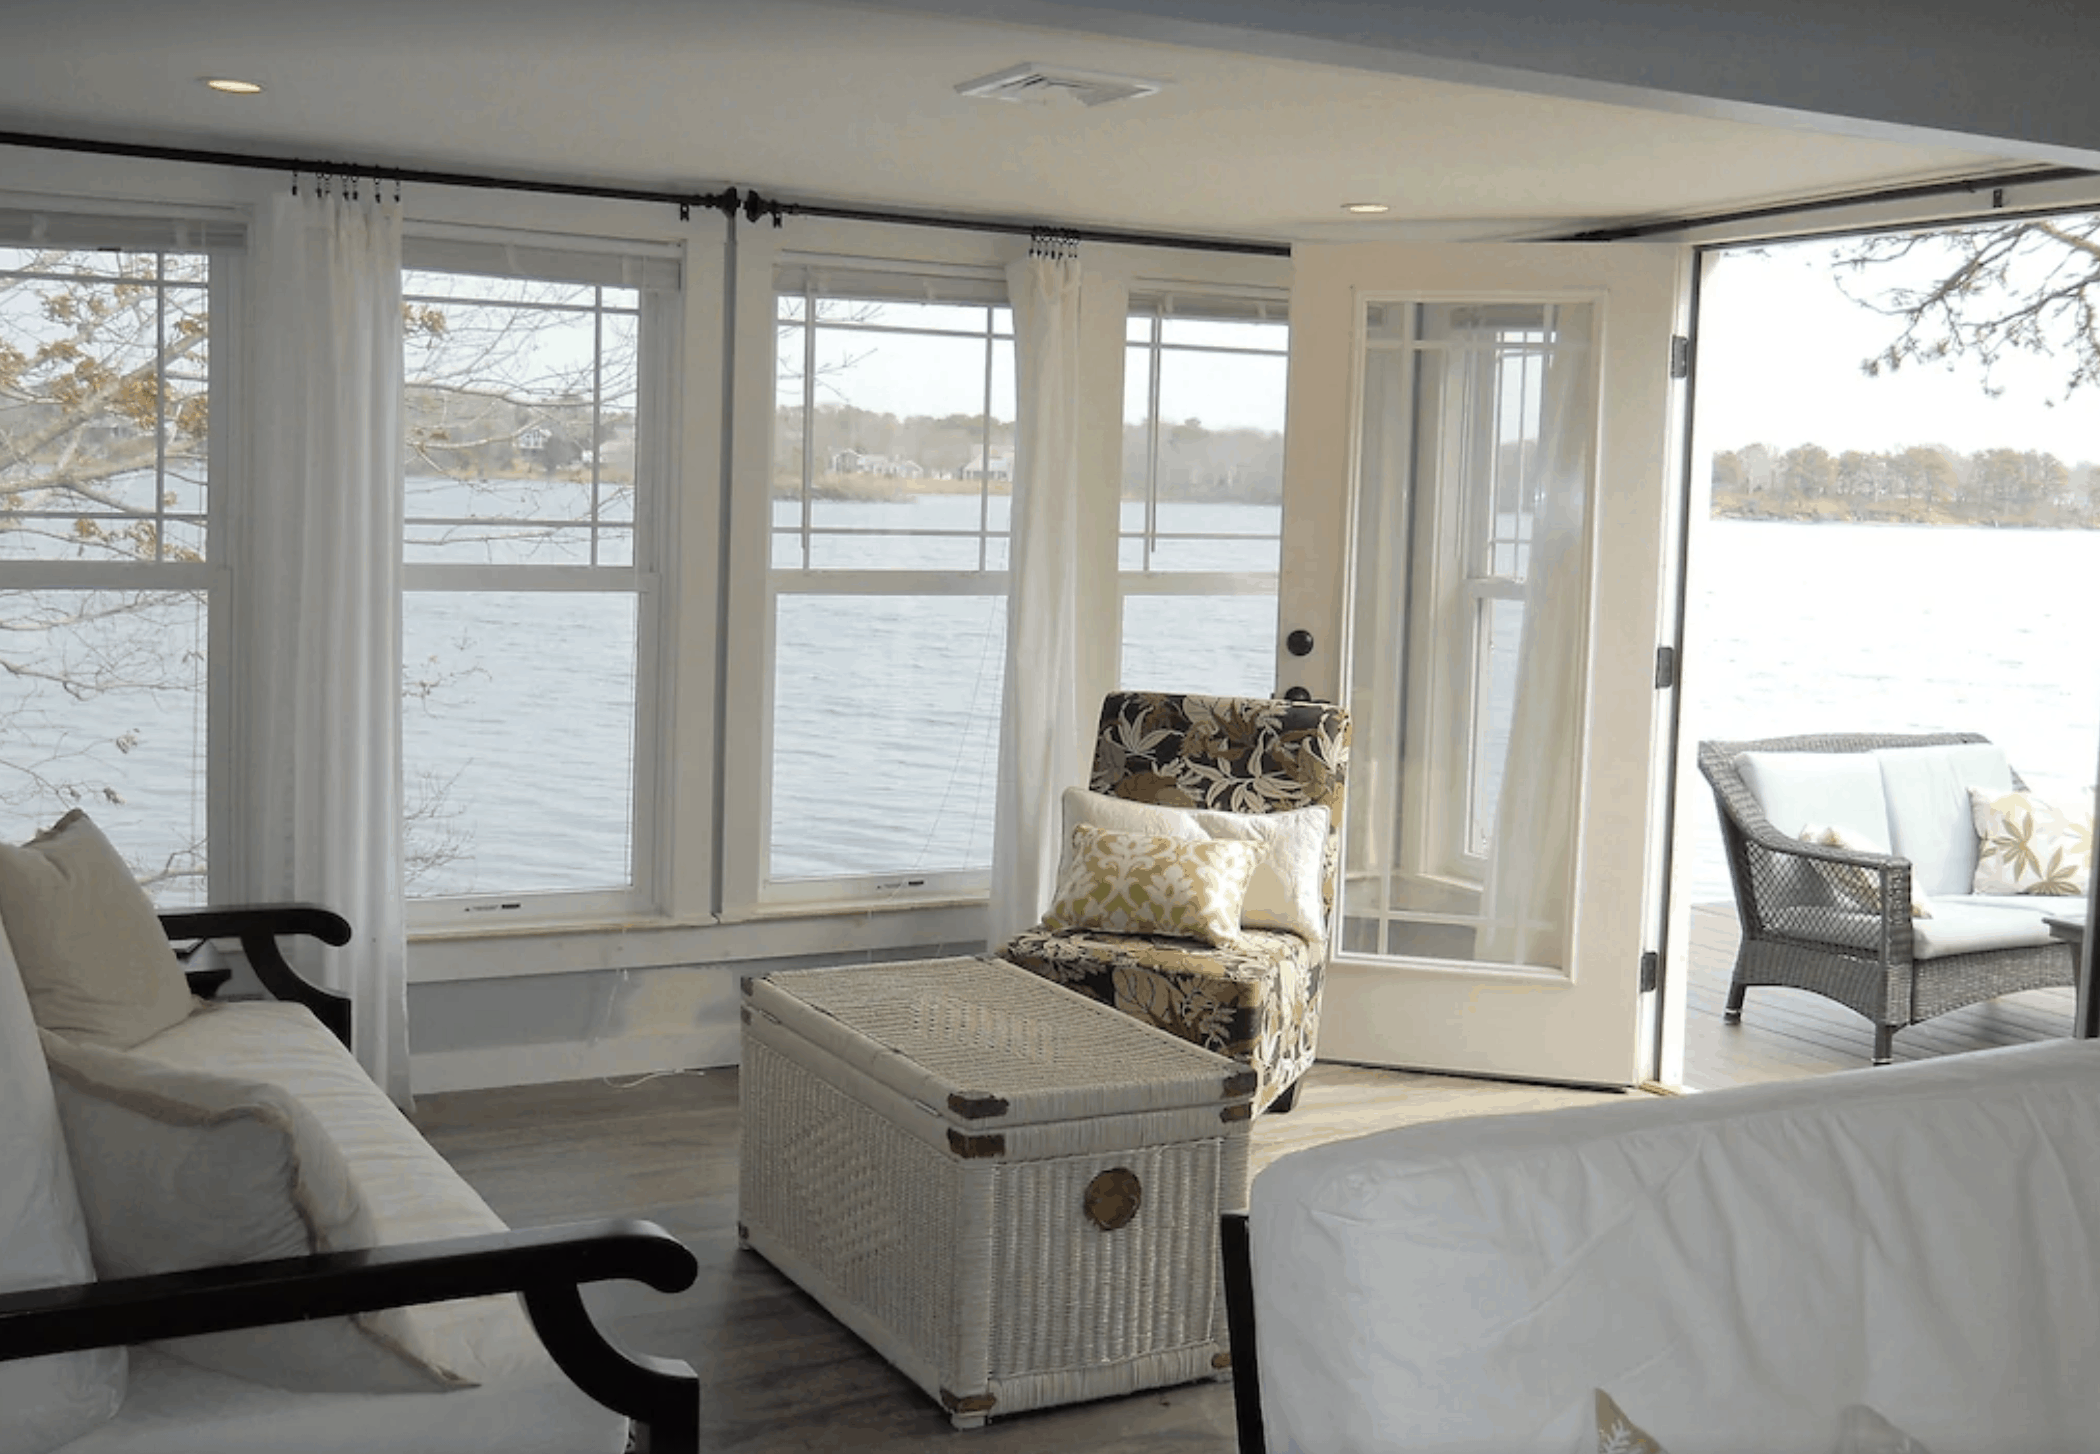 White living room furniture in a coastal MA cabin with lots of windows and an open door.